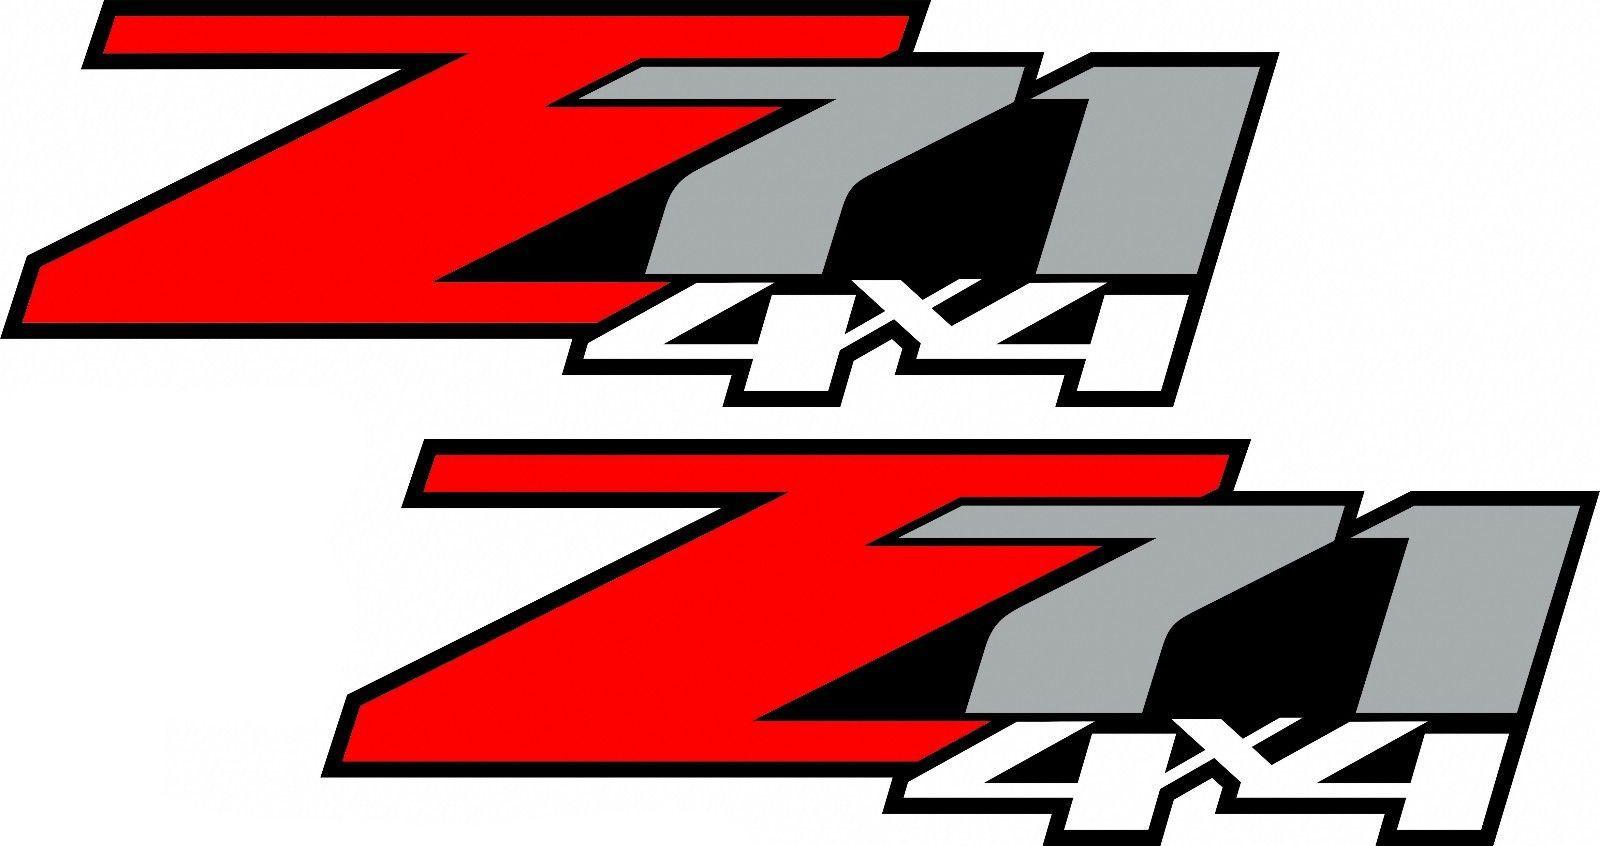 GMC 4x4 Logo - Product: 2 Chevy Z71 Off Road 4x4 Truck Decal/Sticker X2